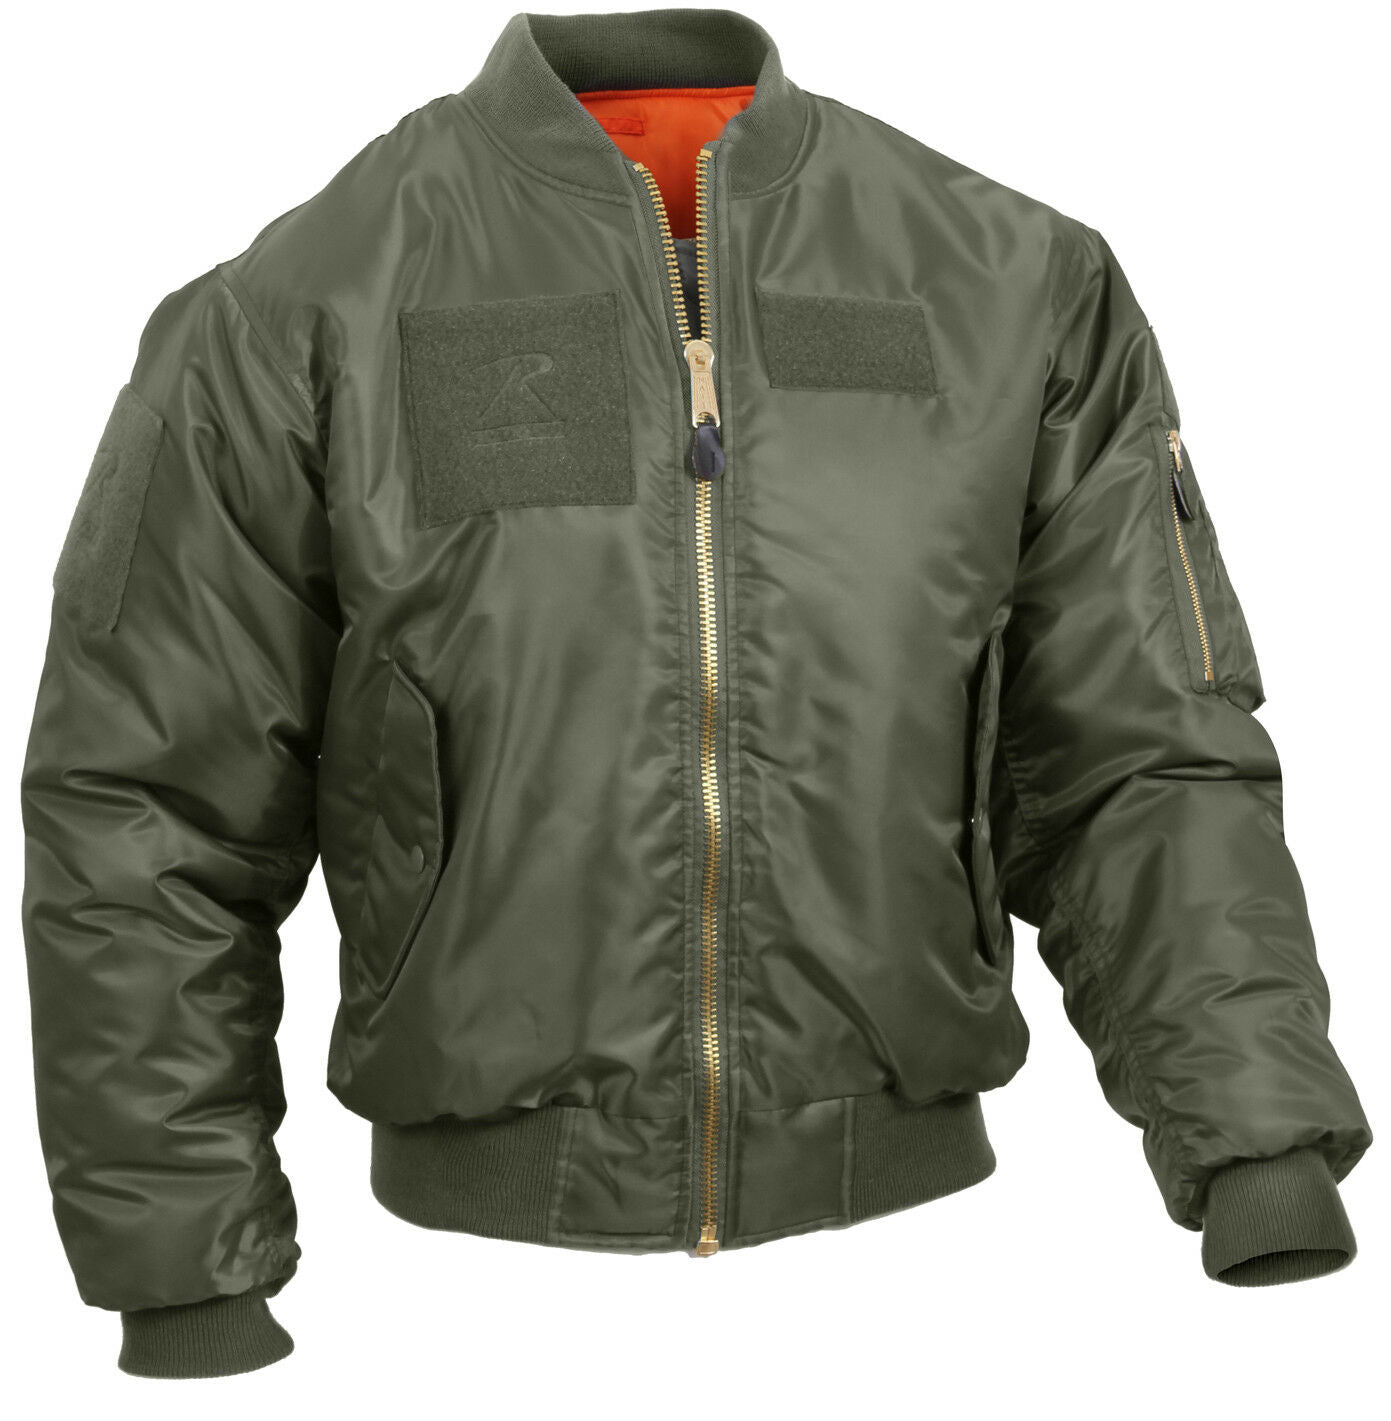 Rothco MA-1 Flight Jacket with Patches - Sage Green